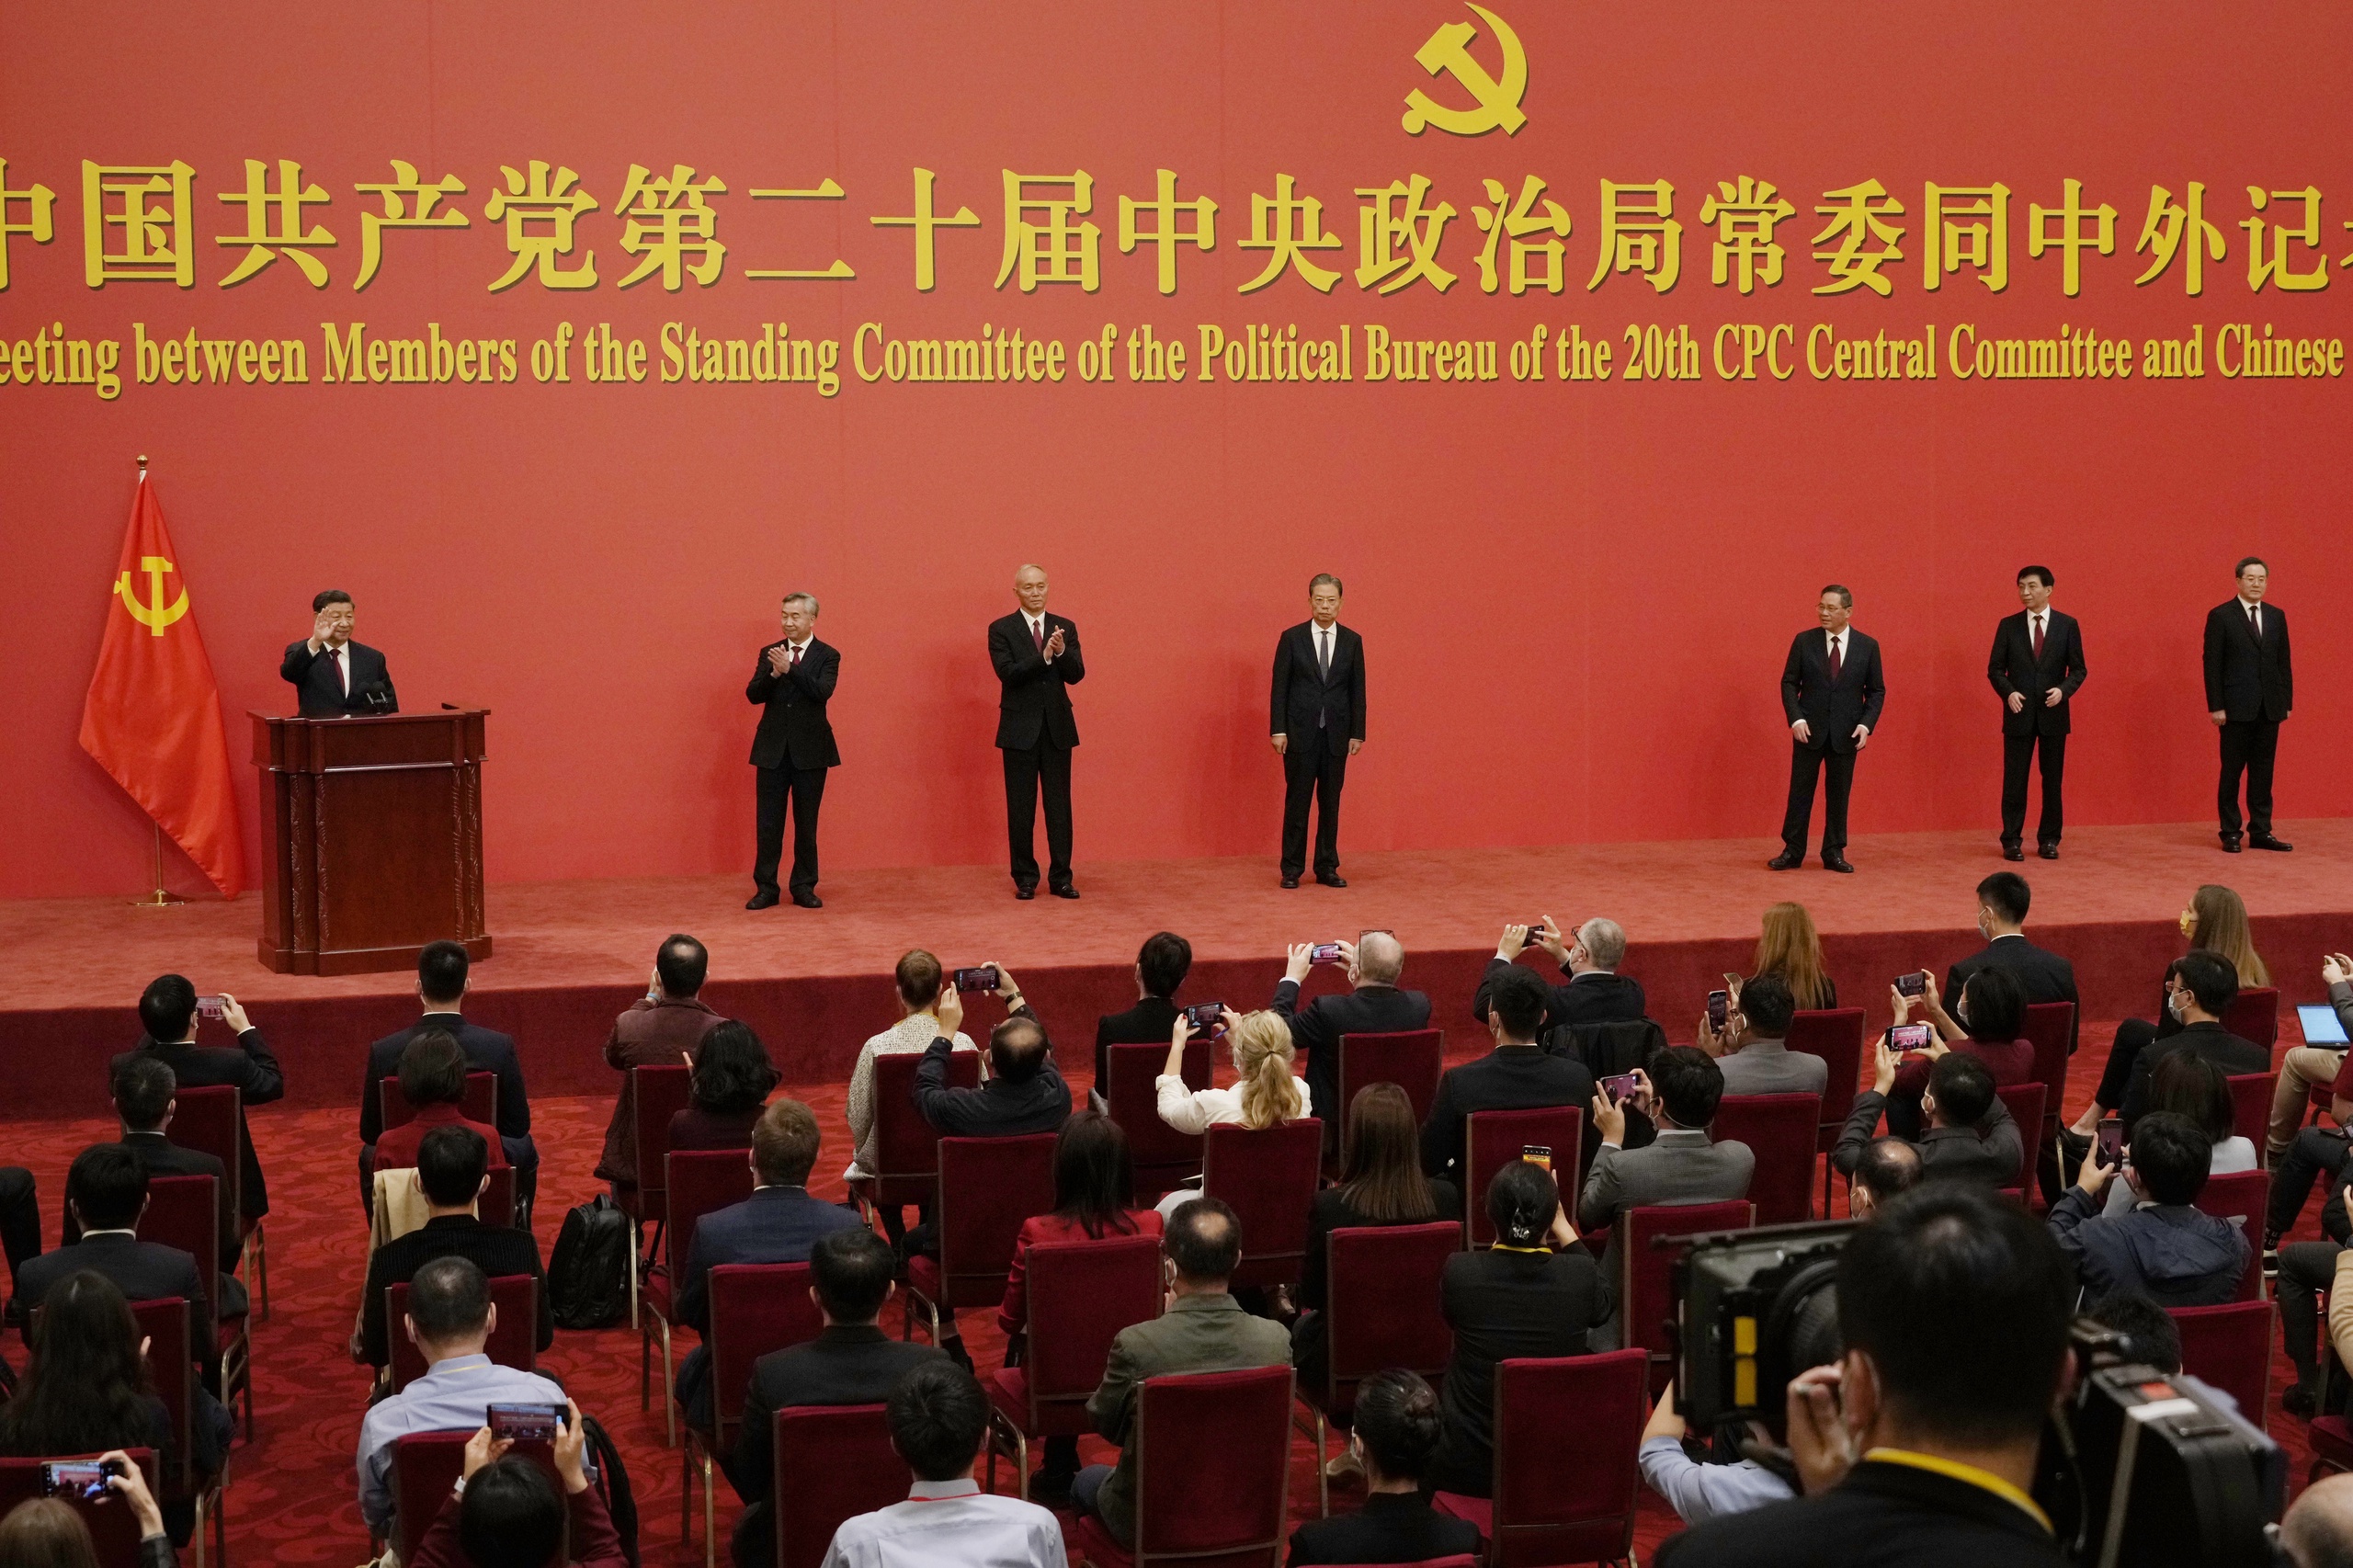 Chinese President Xi Jinping waves at an event to introduce new members of the Politburo Standing Committee at the Great Hall of the People in Beijing, Sunday, Oct. 23, 2022. (AP Photo/Ng Han Guan)